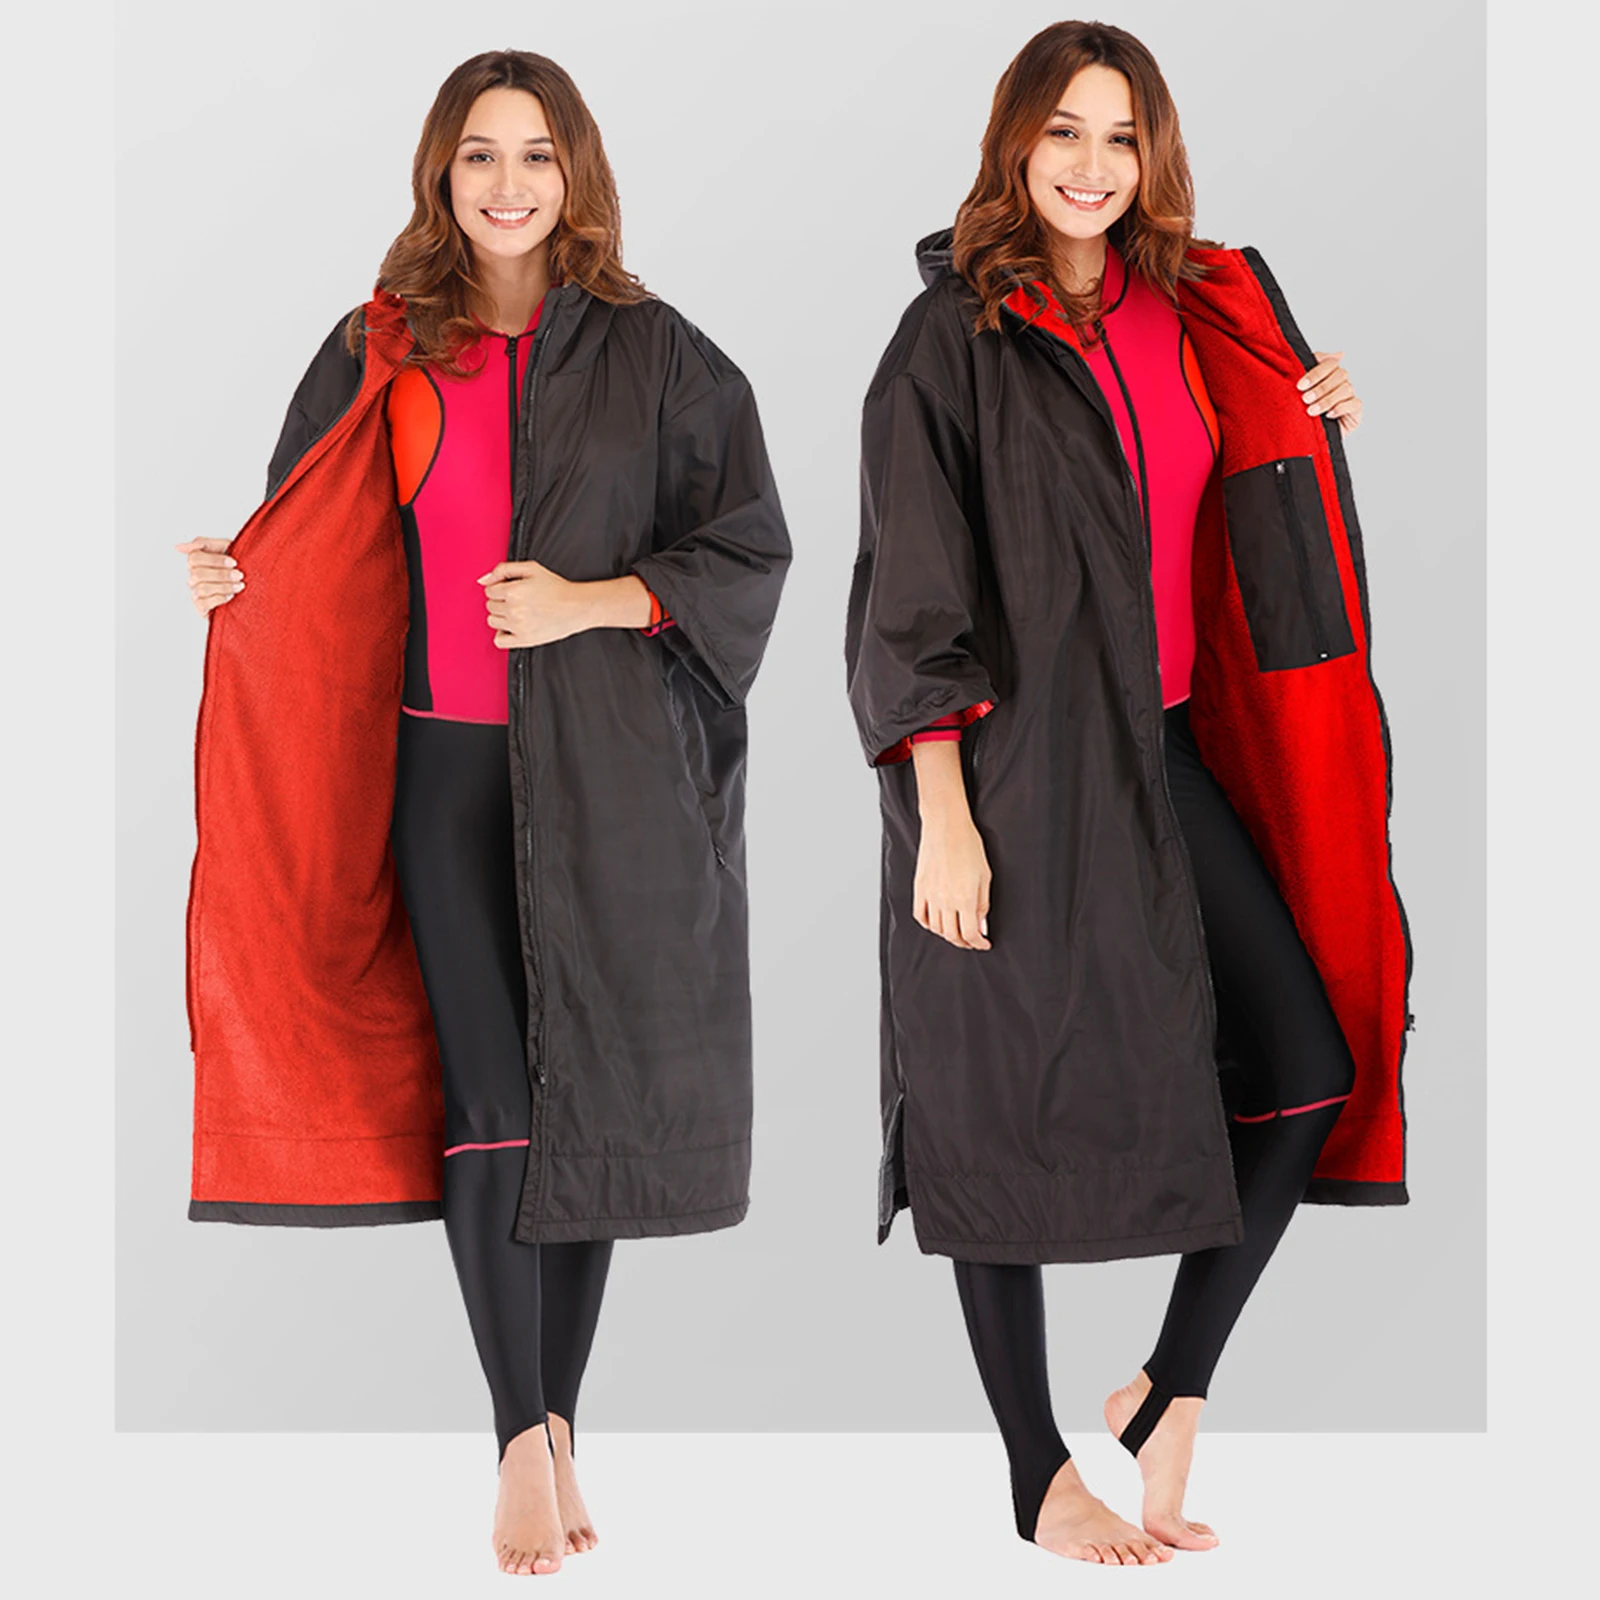 Adults Change Robe Jacket, Keeping Warm Dry Windproof Waterproof Oversized Poncho Coat for Swimming Surfing Beach